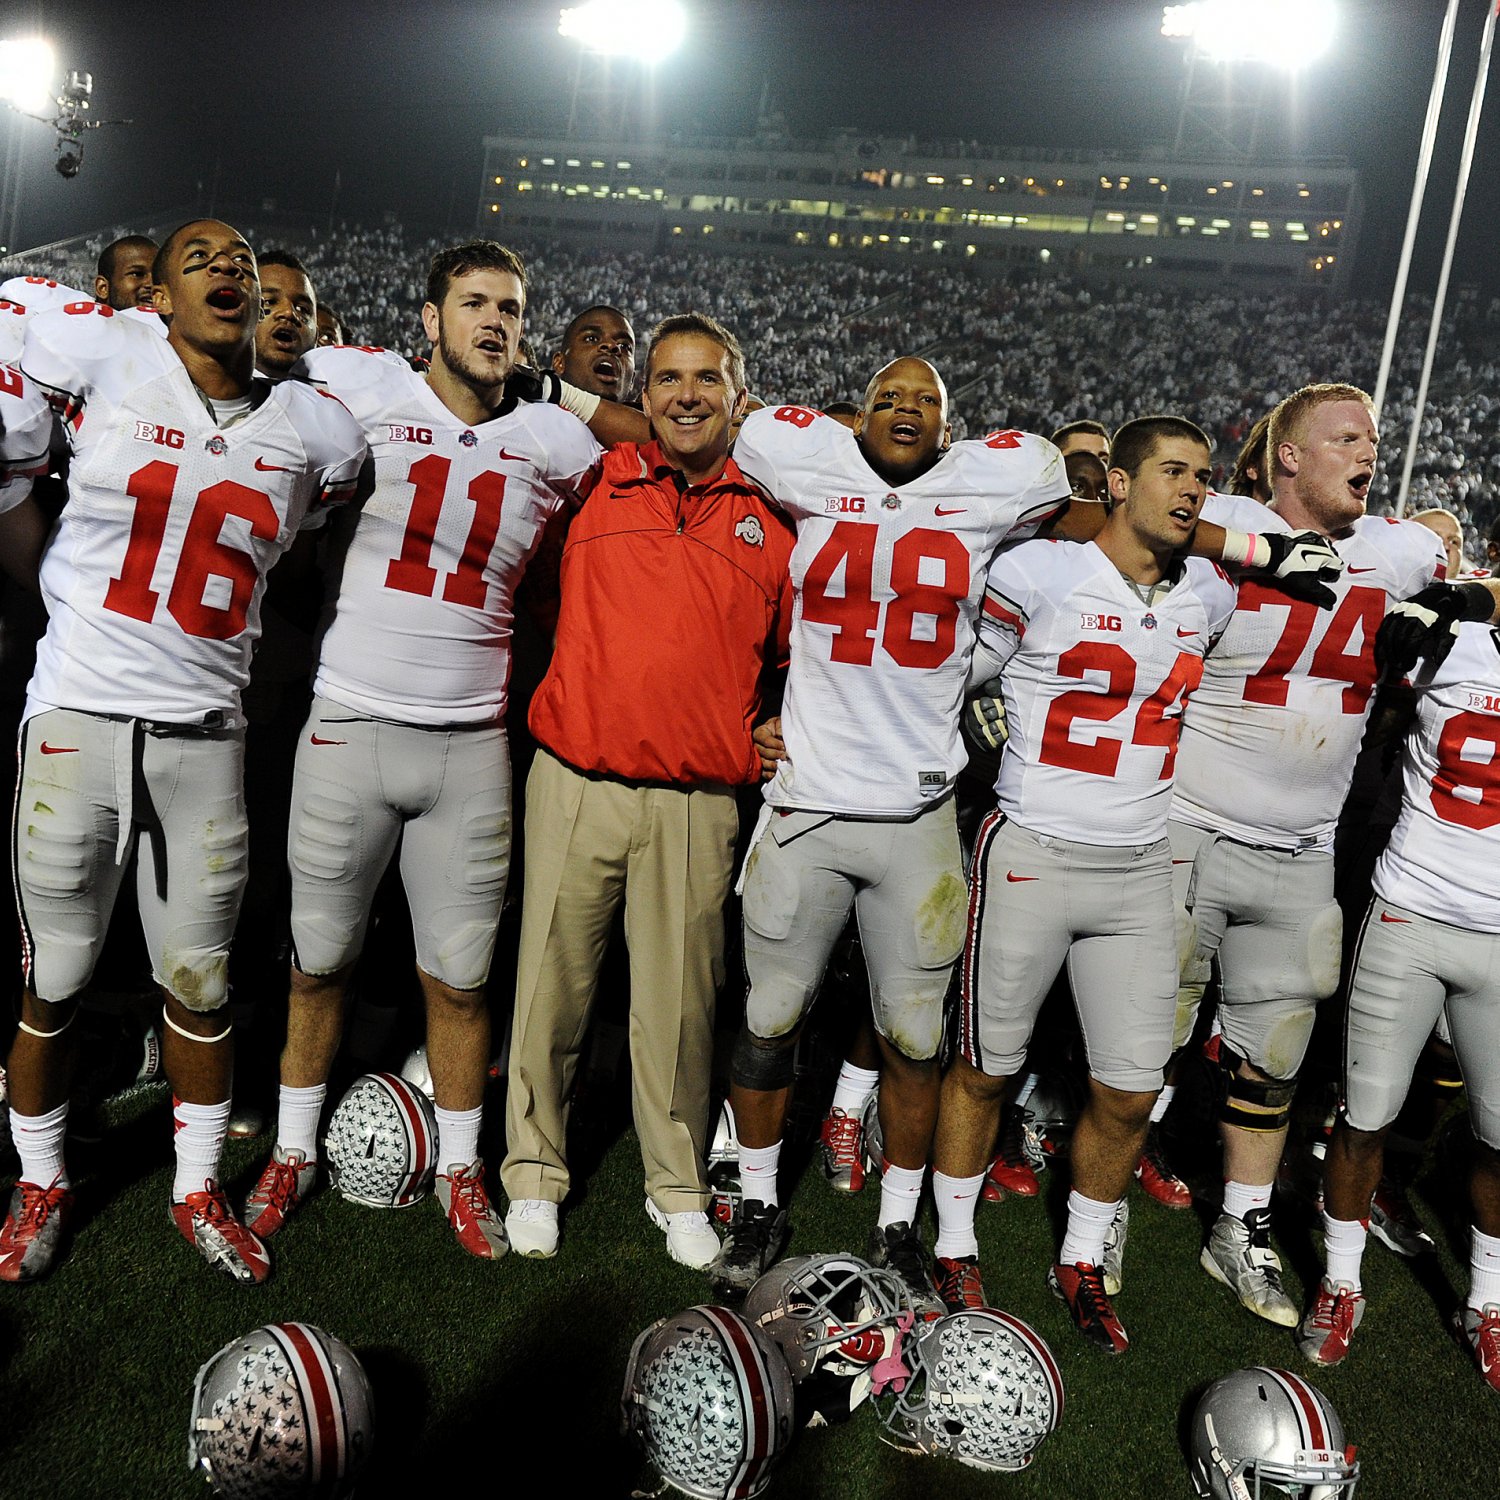 Ohio State Football 2014 Signees Who Likely Won't See Field Until